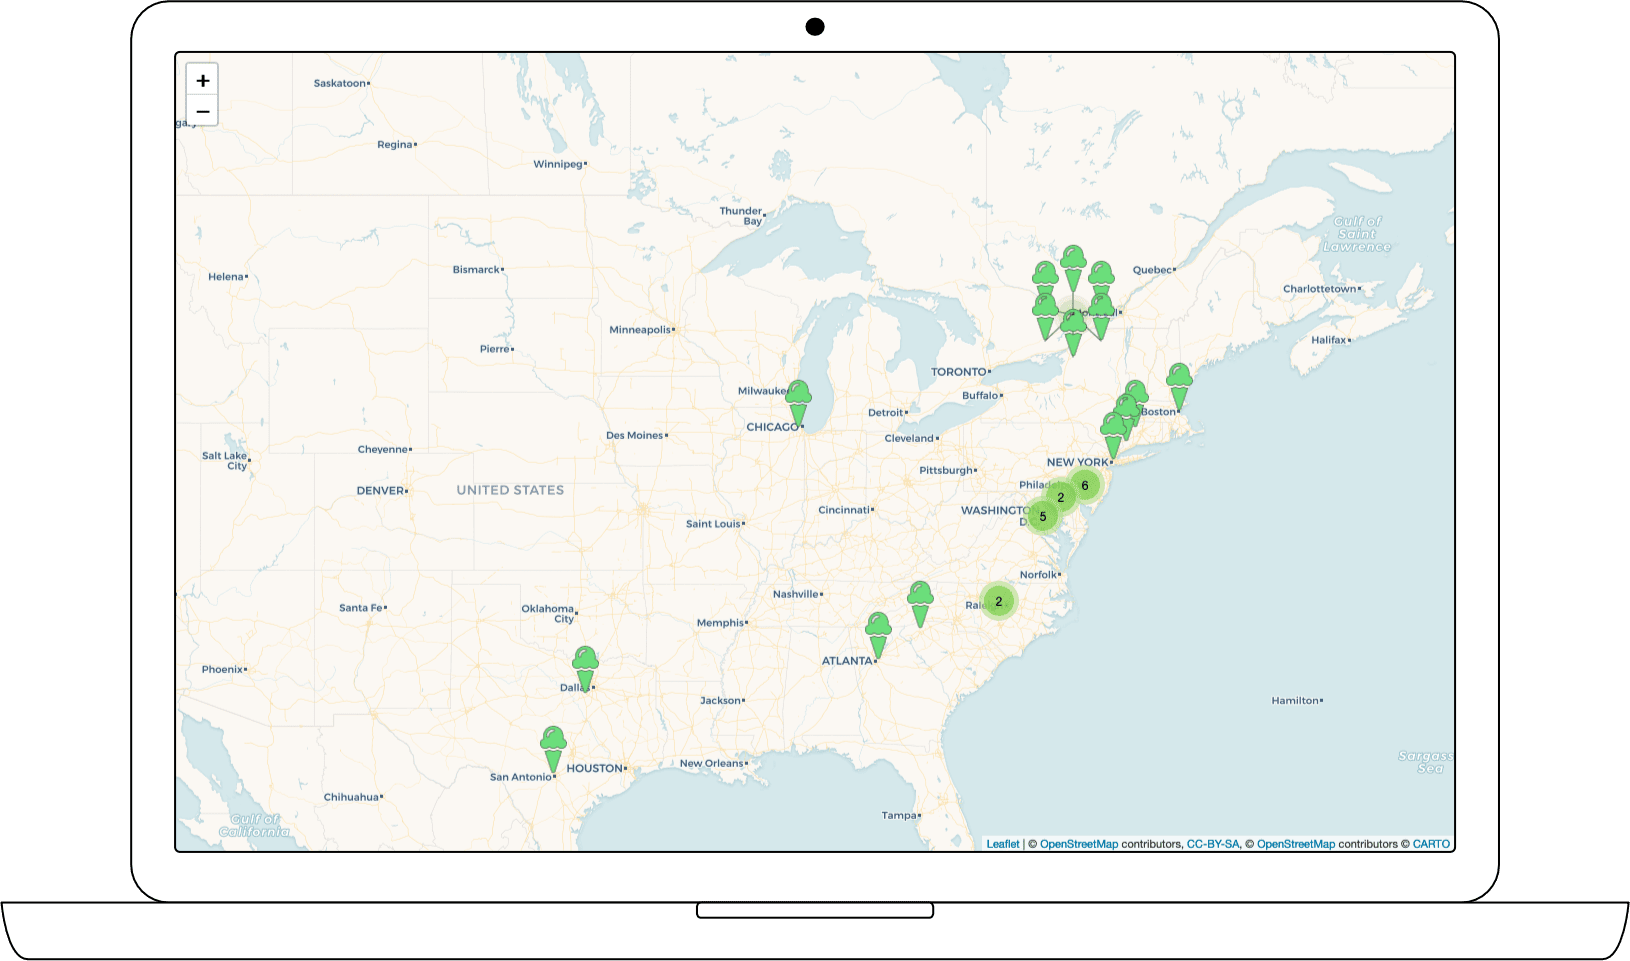 Interactive map developed in R Studio using Leaflet